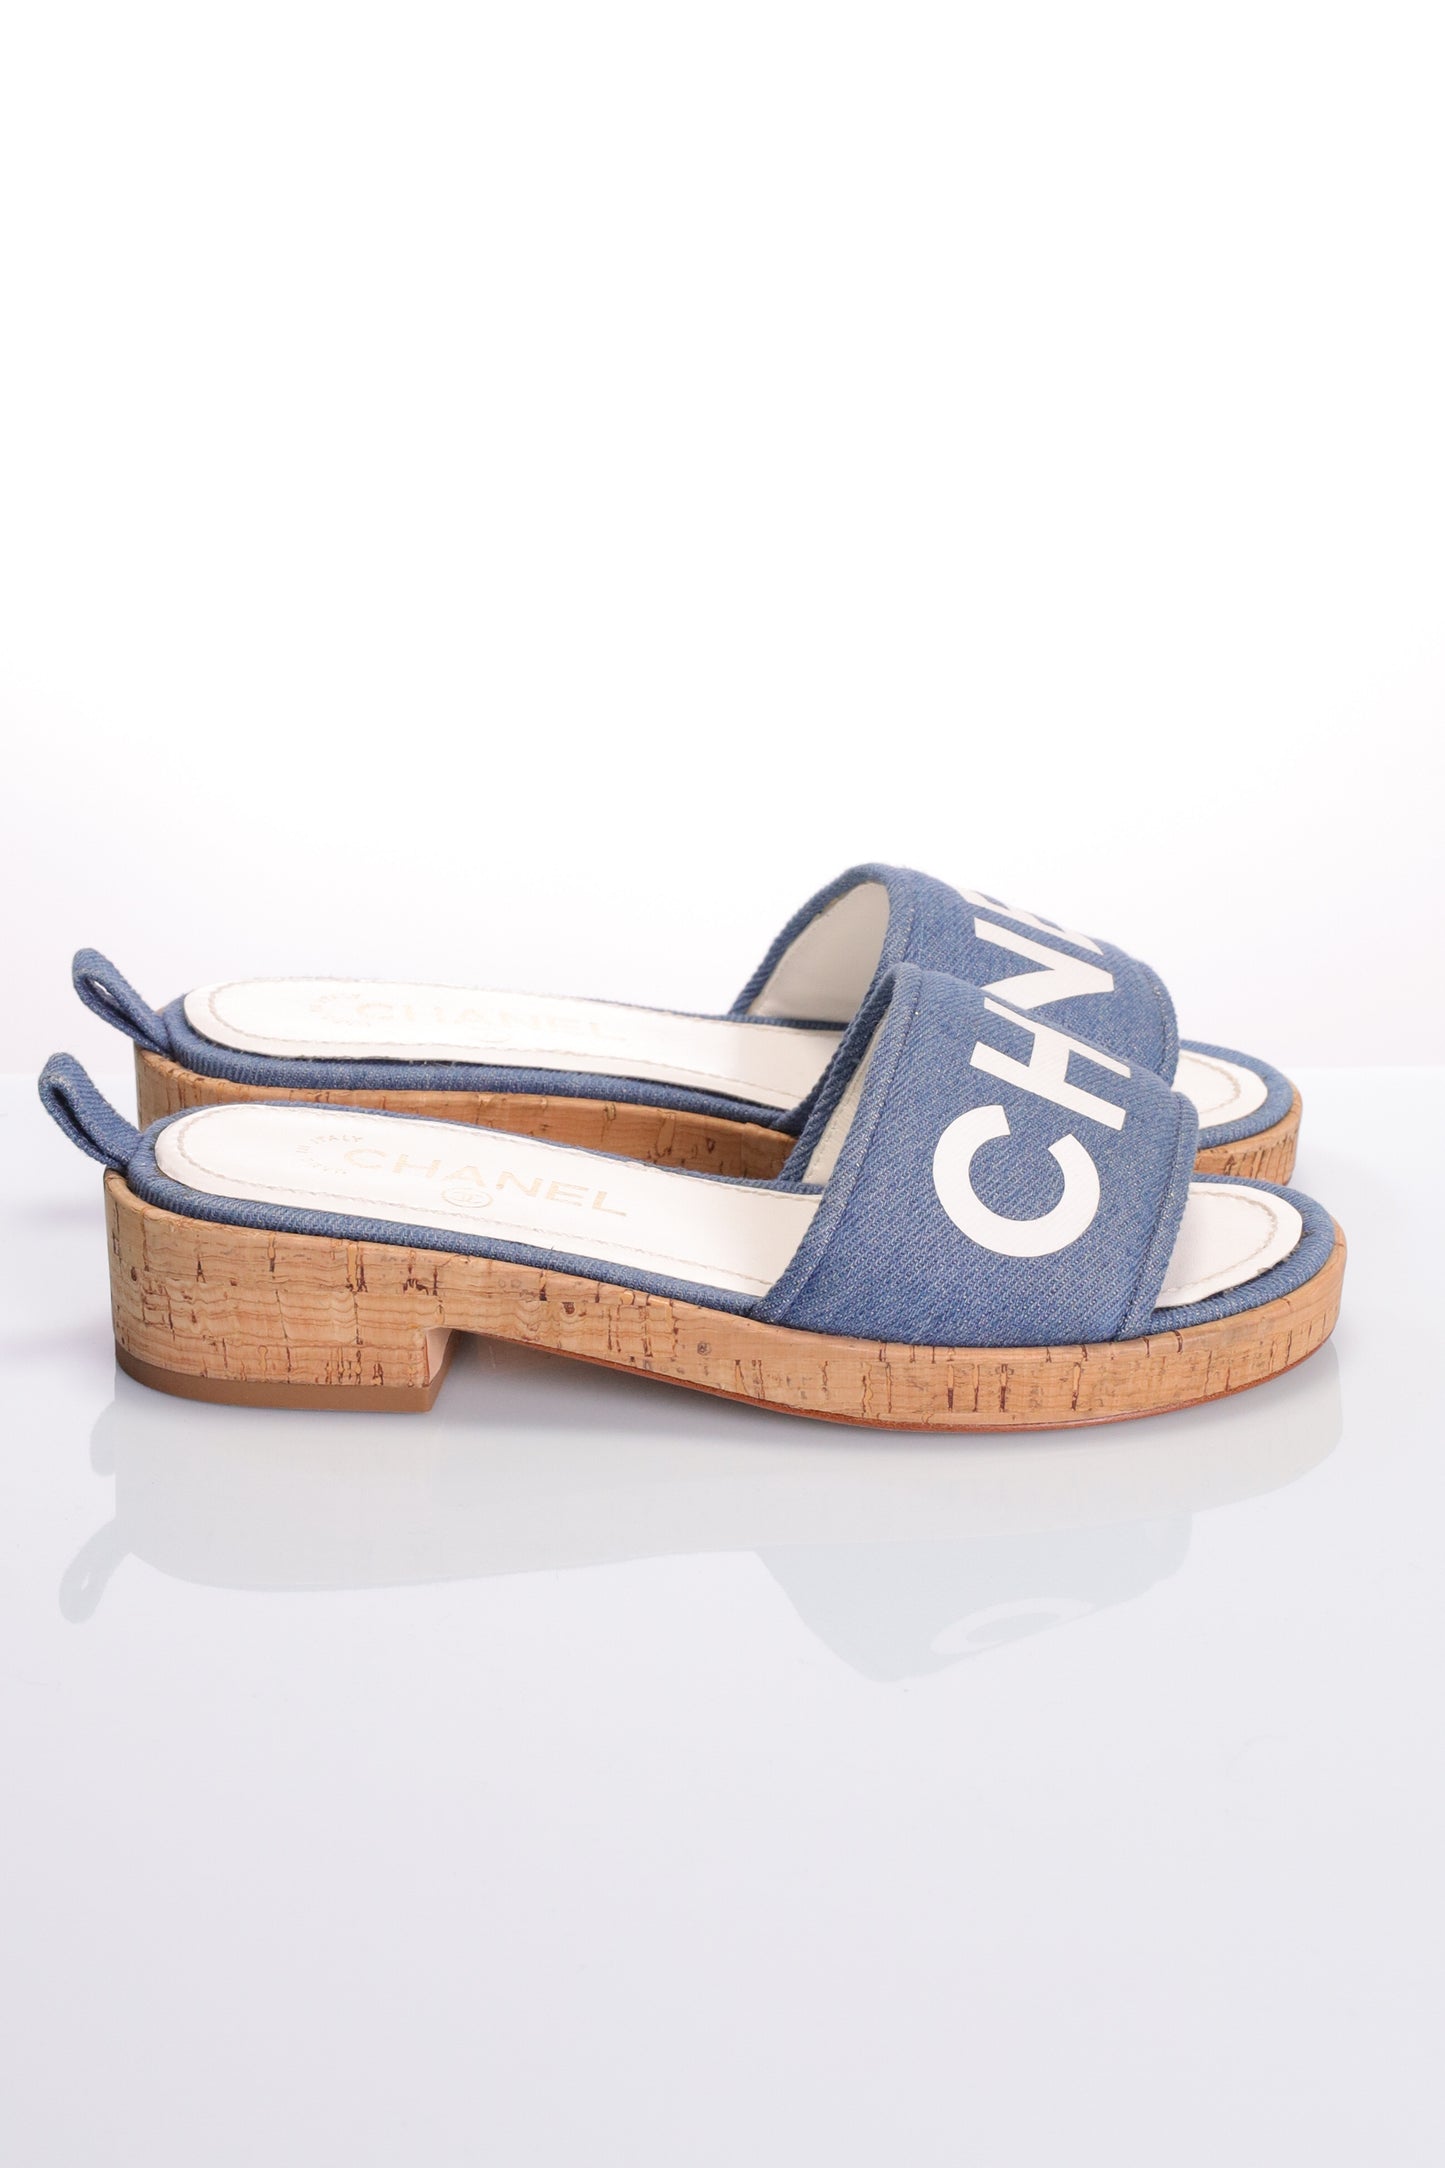 CHANEL MULES size. 37 CHA NEL sandals G34876 mules new